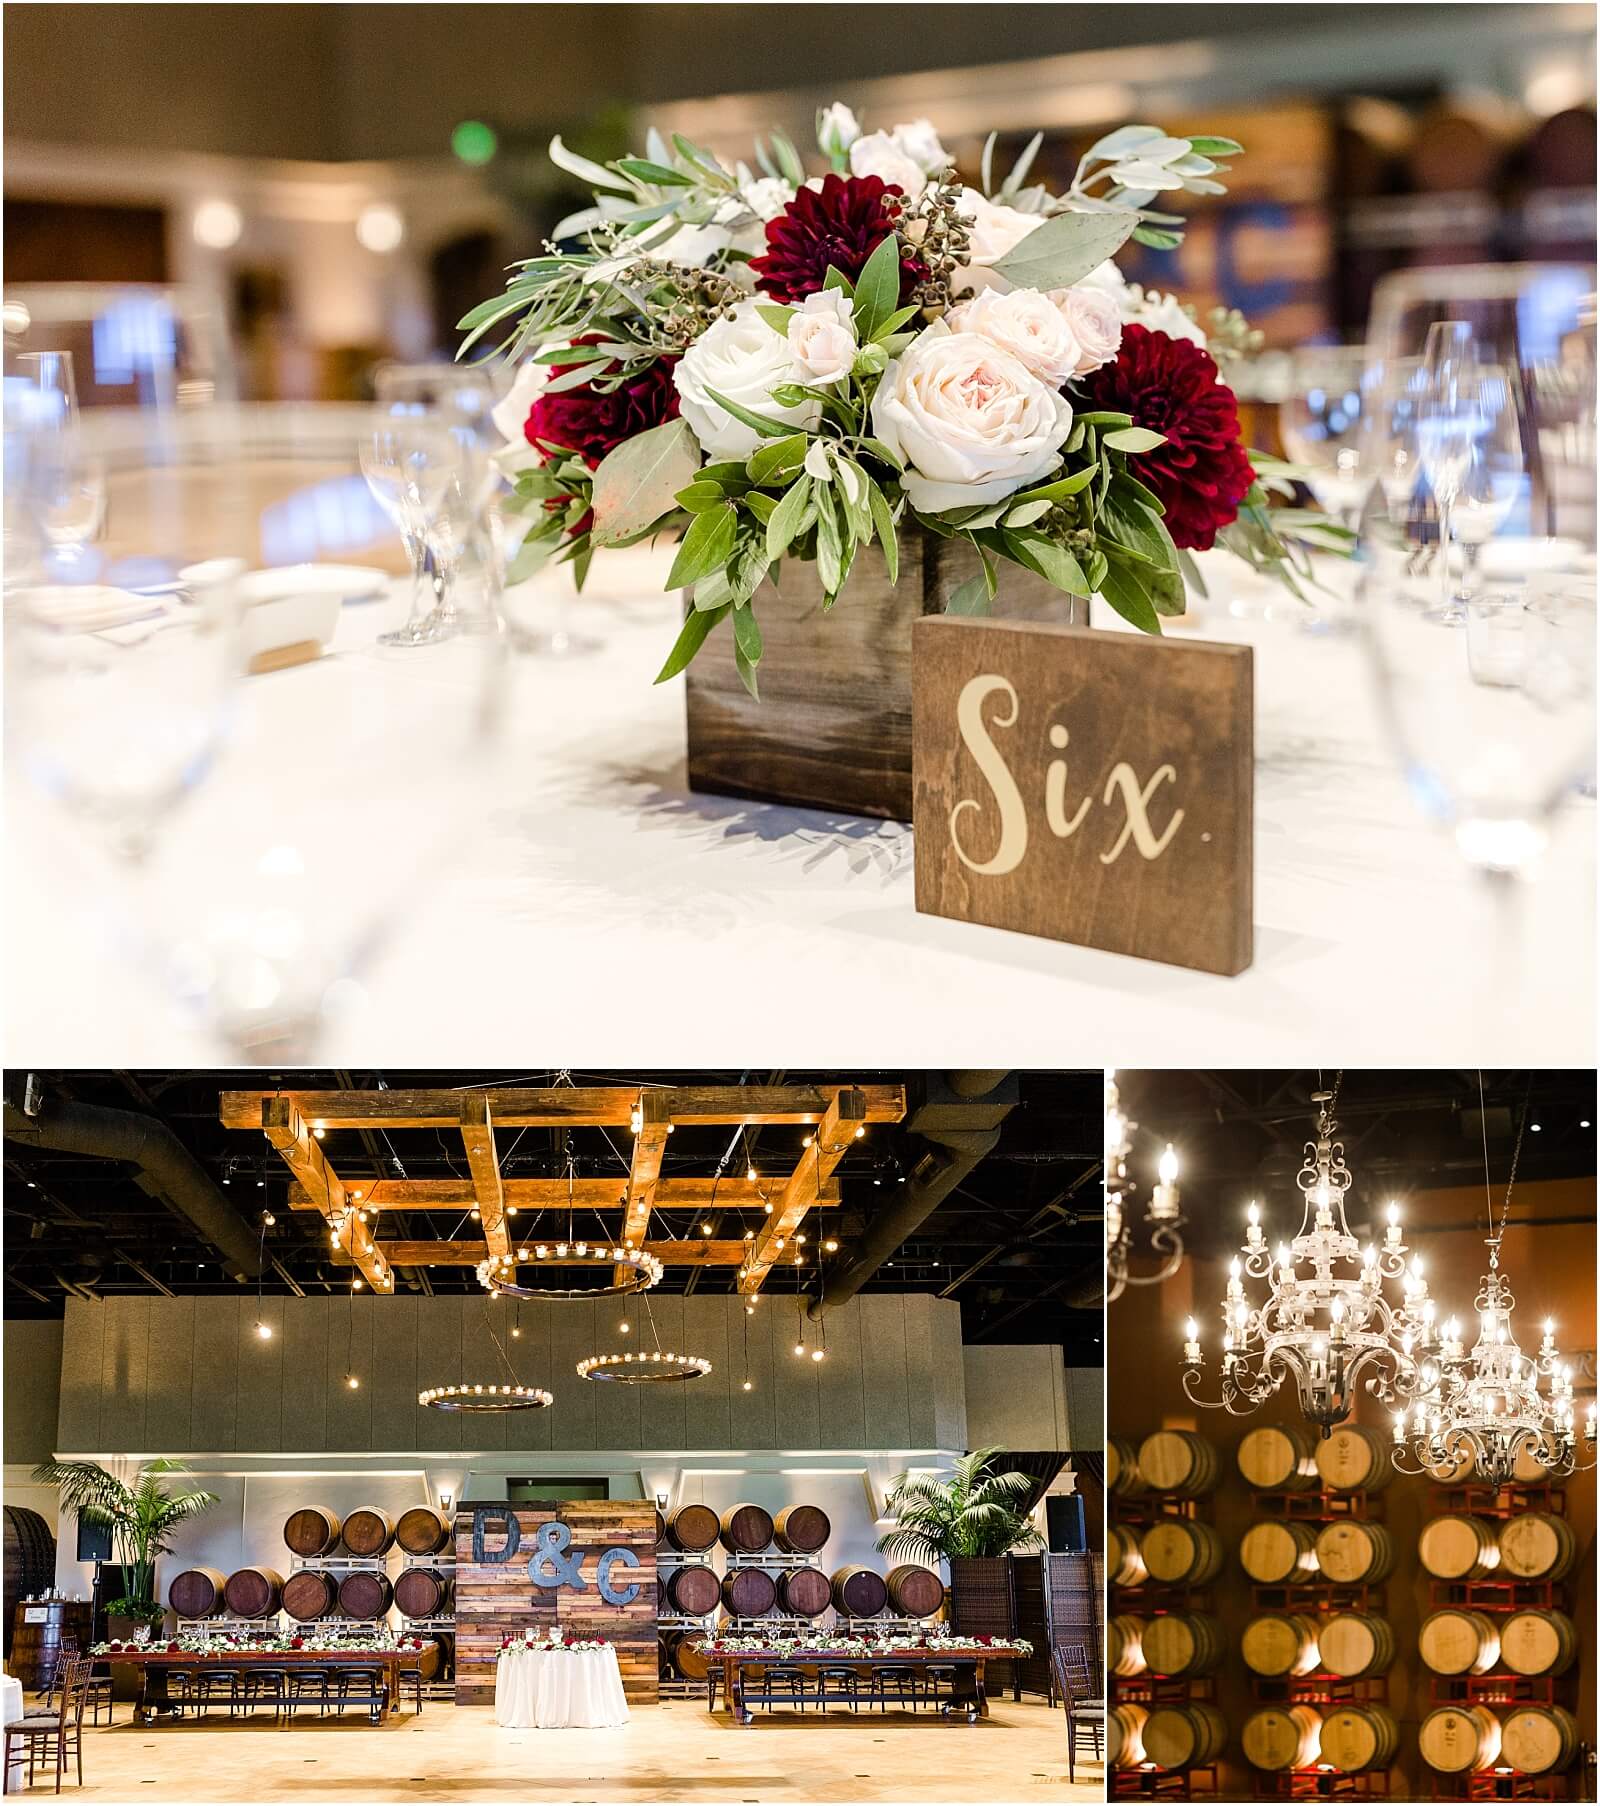 Reception table with wood sign, burgundy dahlias and white roses centerpiece. Wedding with wine barrel decor at Palm Event Center in Pleasanton, CA.